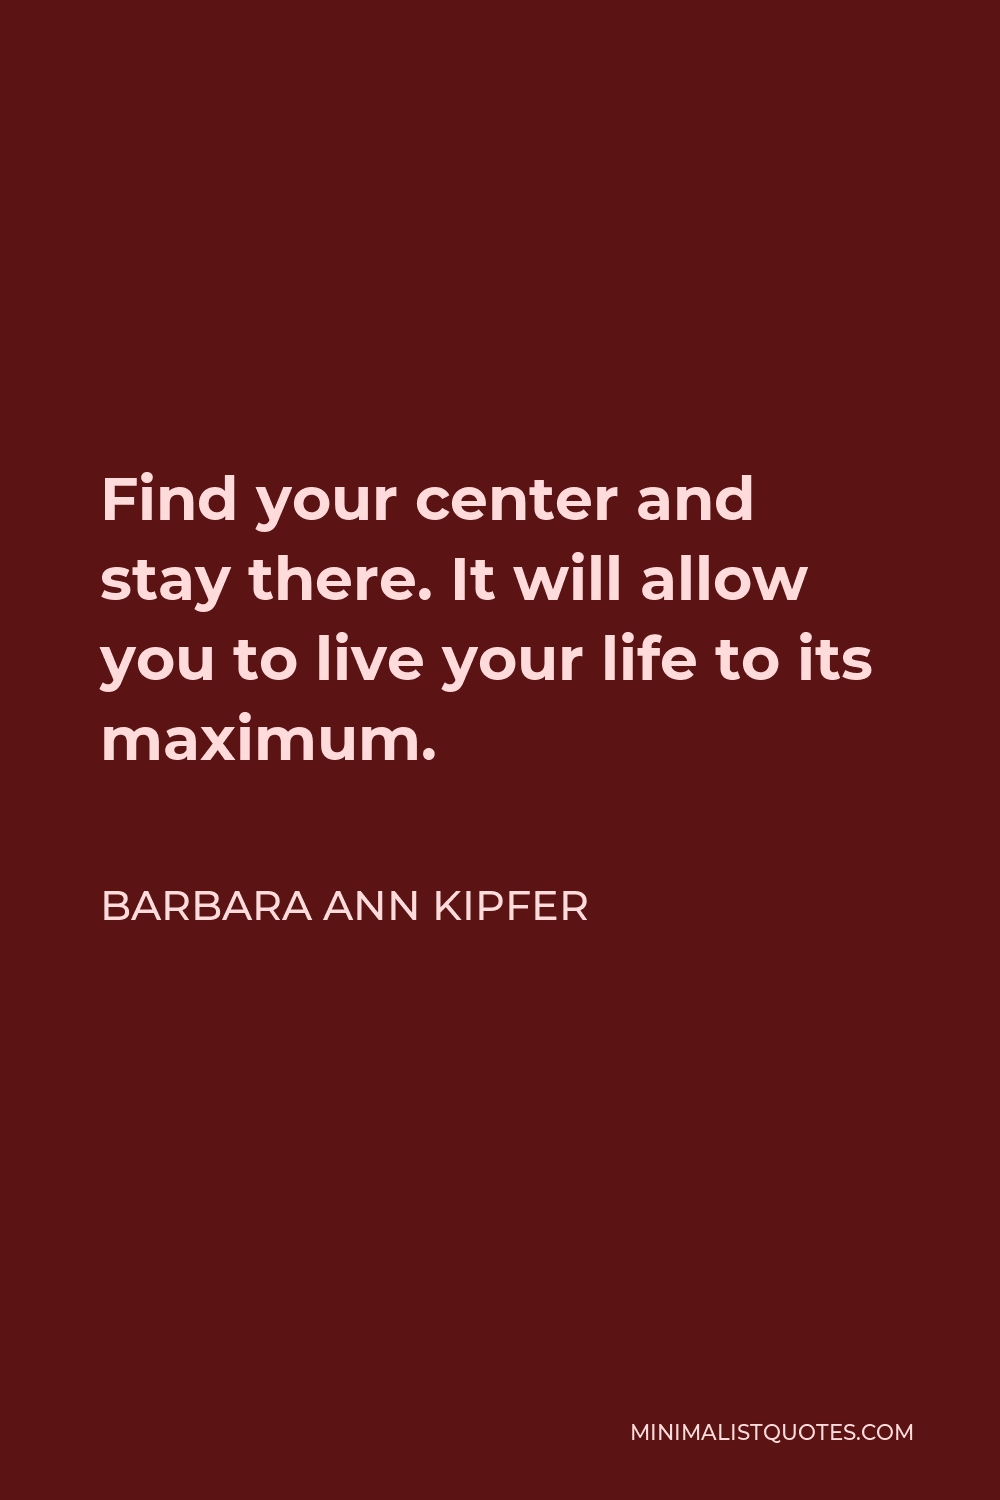 Barbara Ann Kipfer Quote - Find your center and stay there. It will allow you to live your life to its maximum.